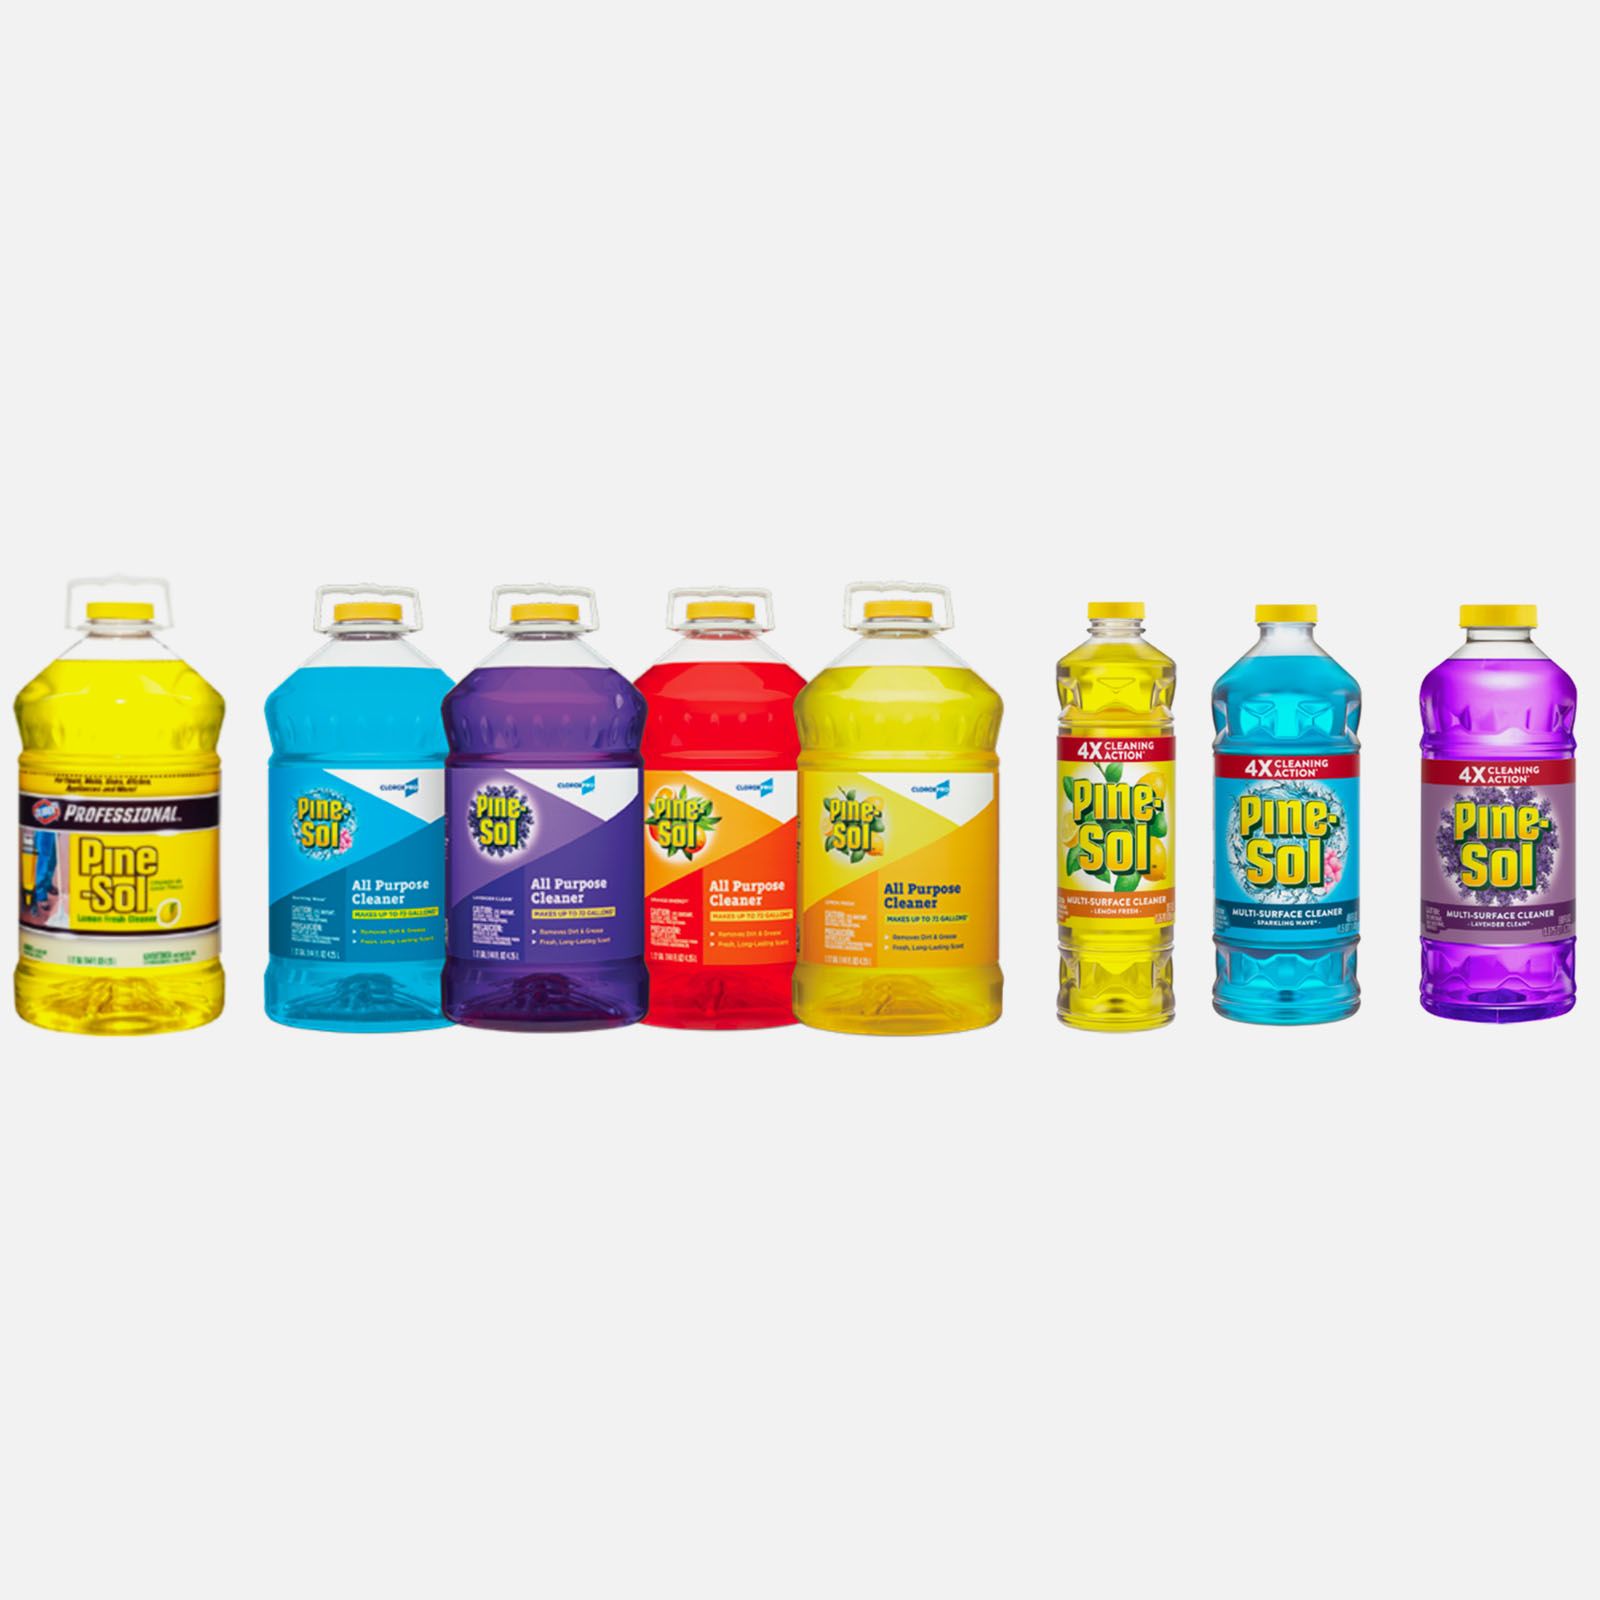 is pine sol safe for dogs